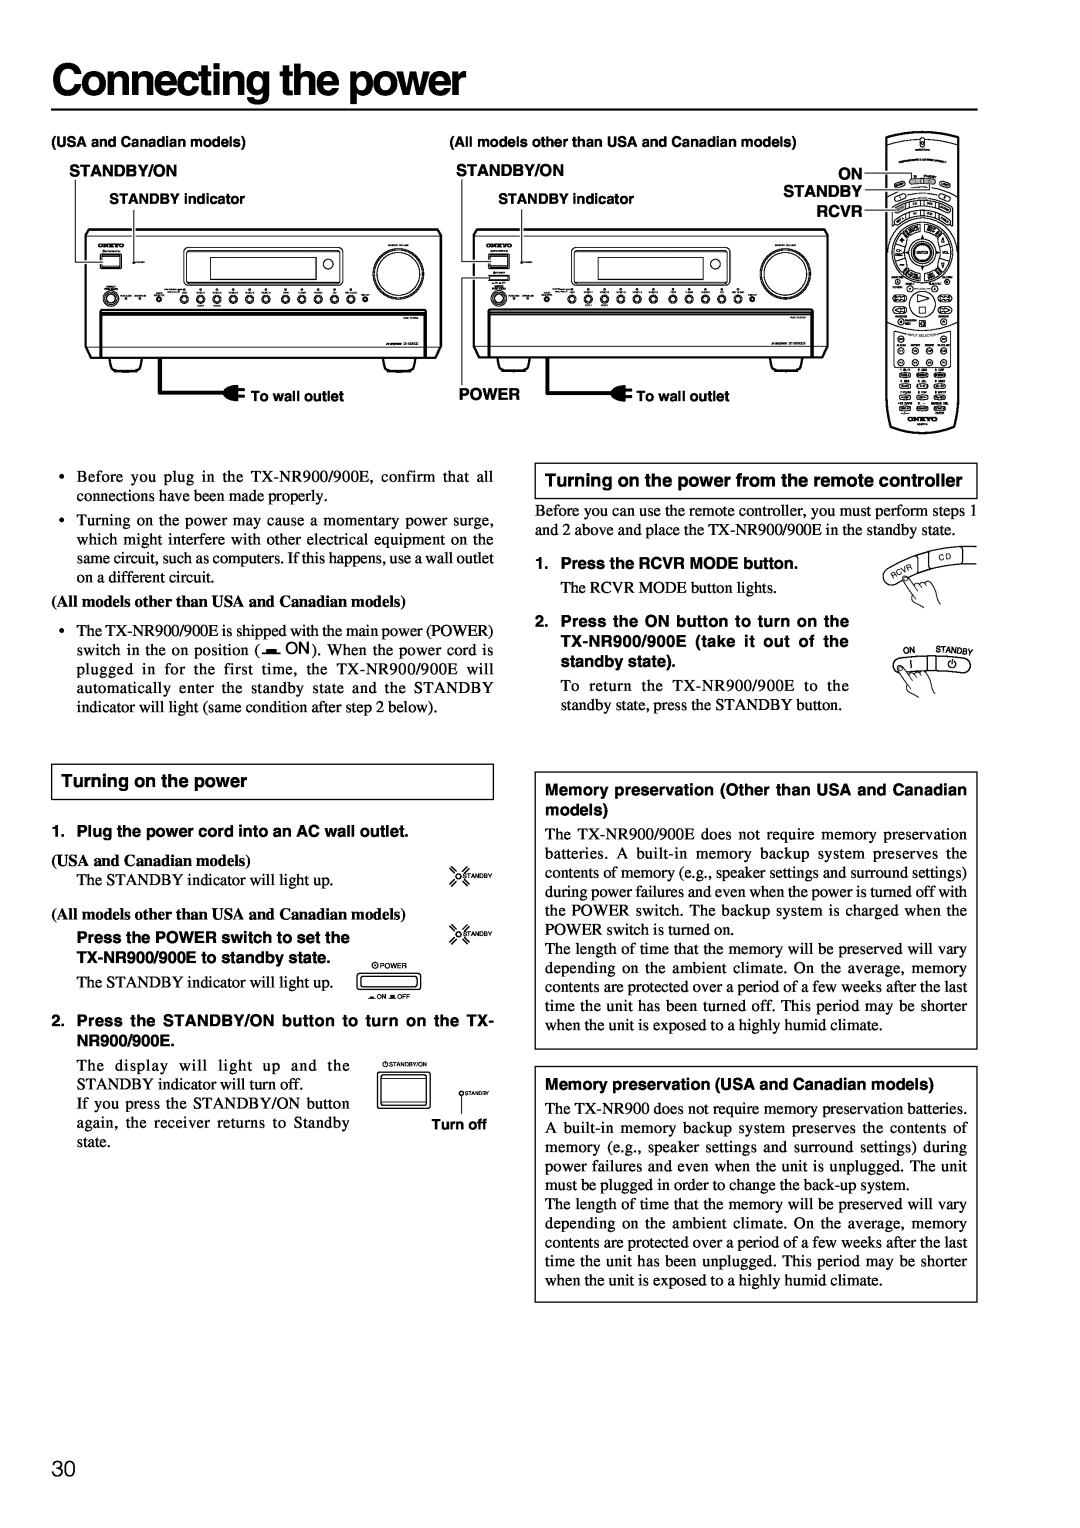 Onkyo TX-NR900E instruction manual Connecting the power, Turning on the power from the remote controller 